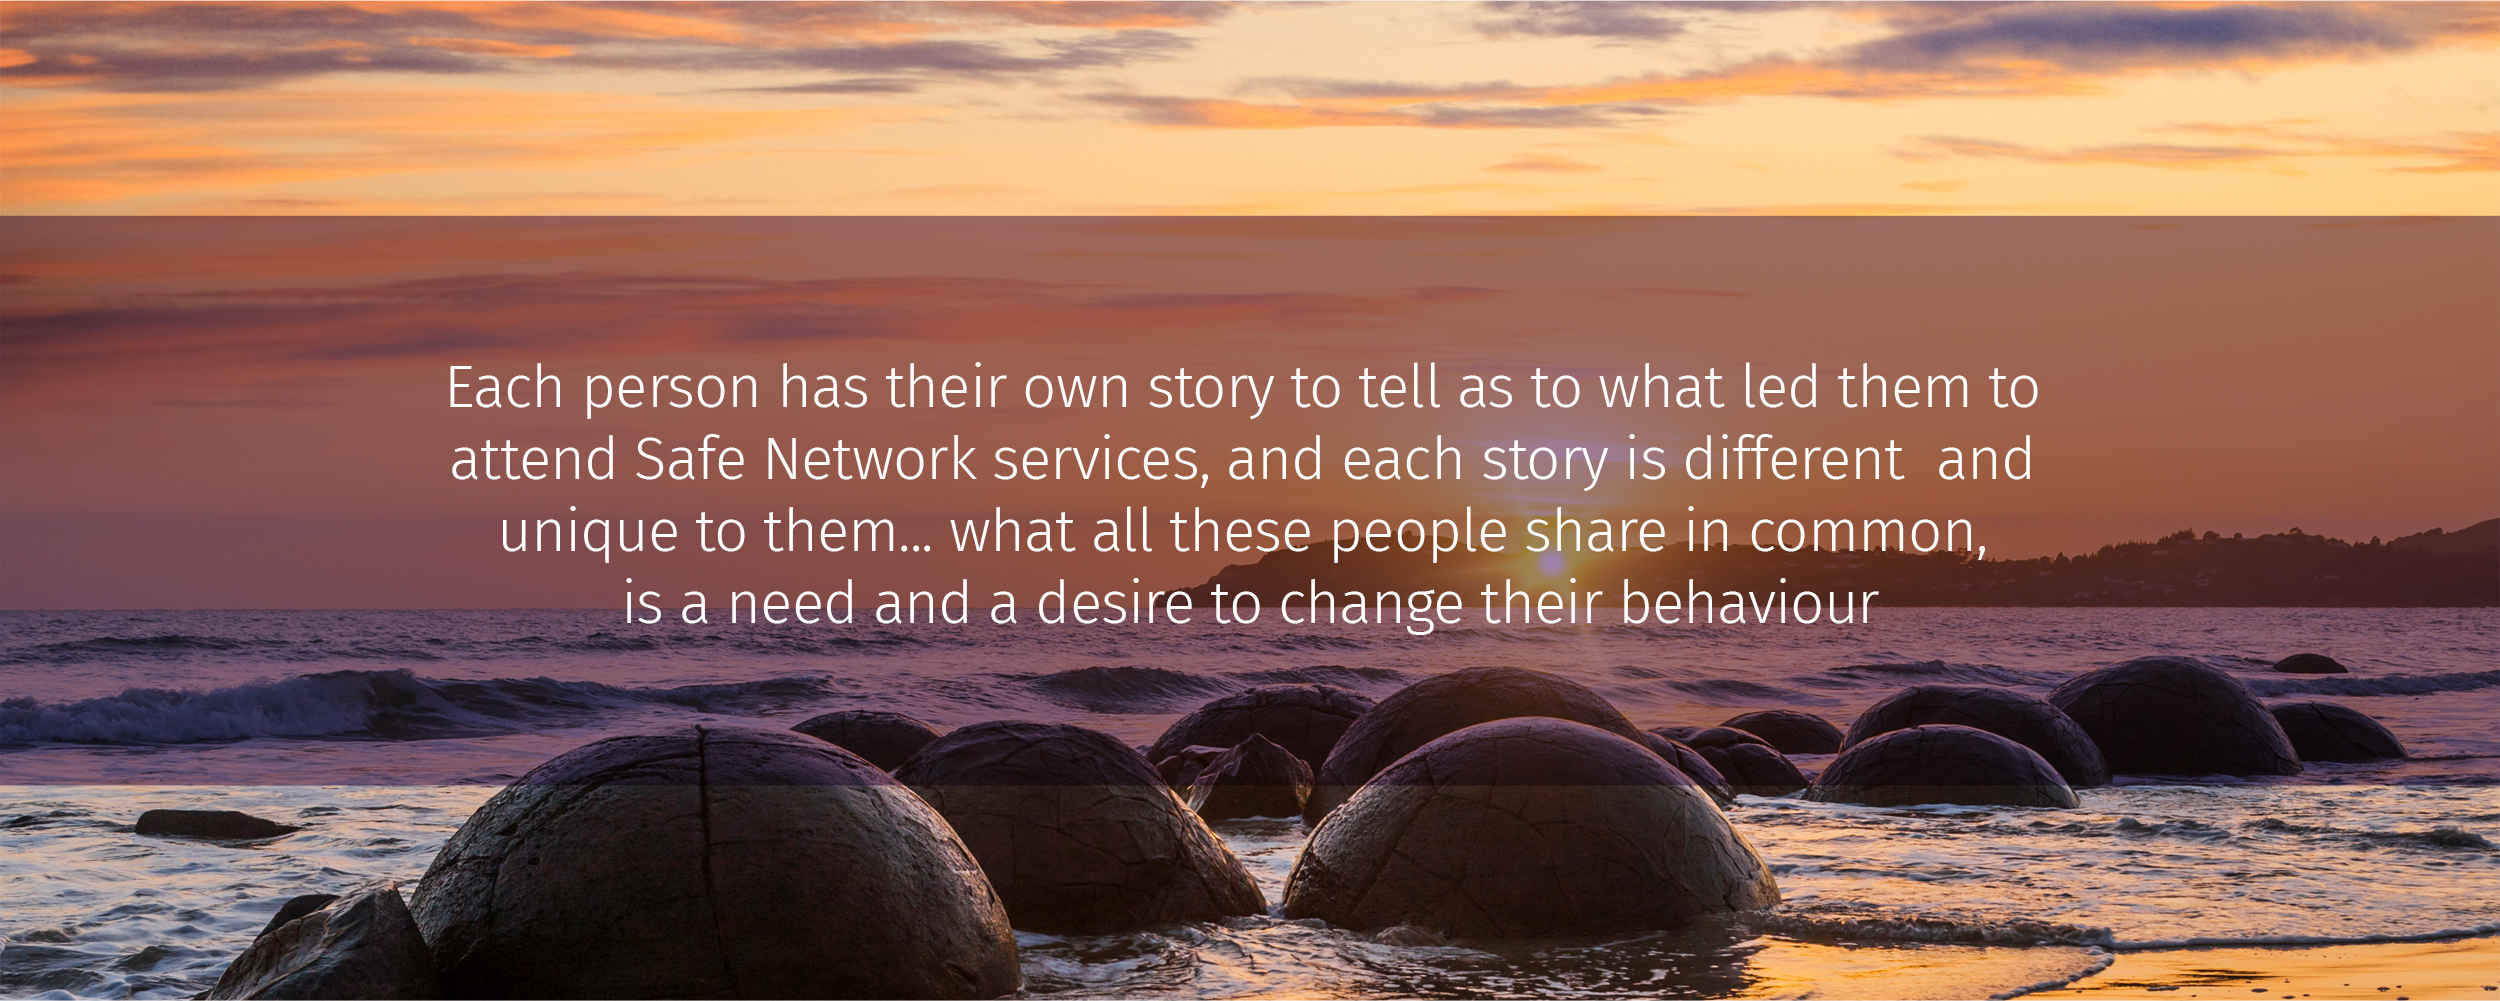 Each person has their own story to tell as to what led them to attend Safe Network services, and each story is different and unique to them... what all these people share in common, is a need and a desire to change their behaviour